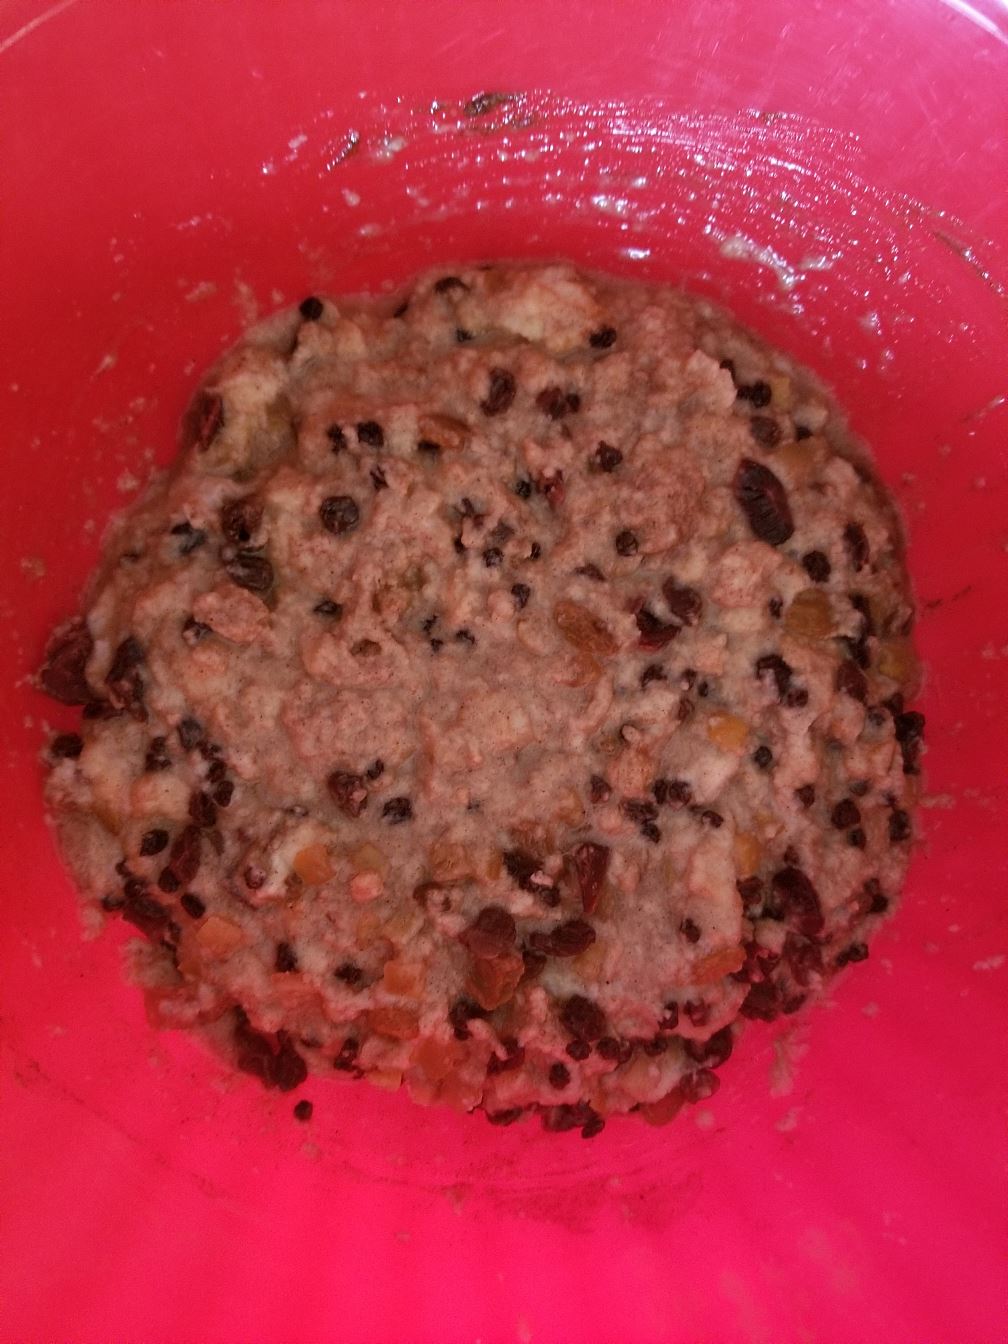 Bread pudding mixture ready to be cooked